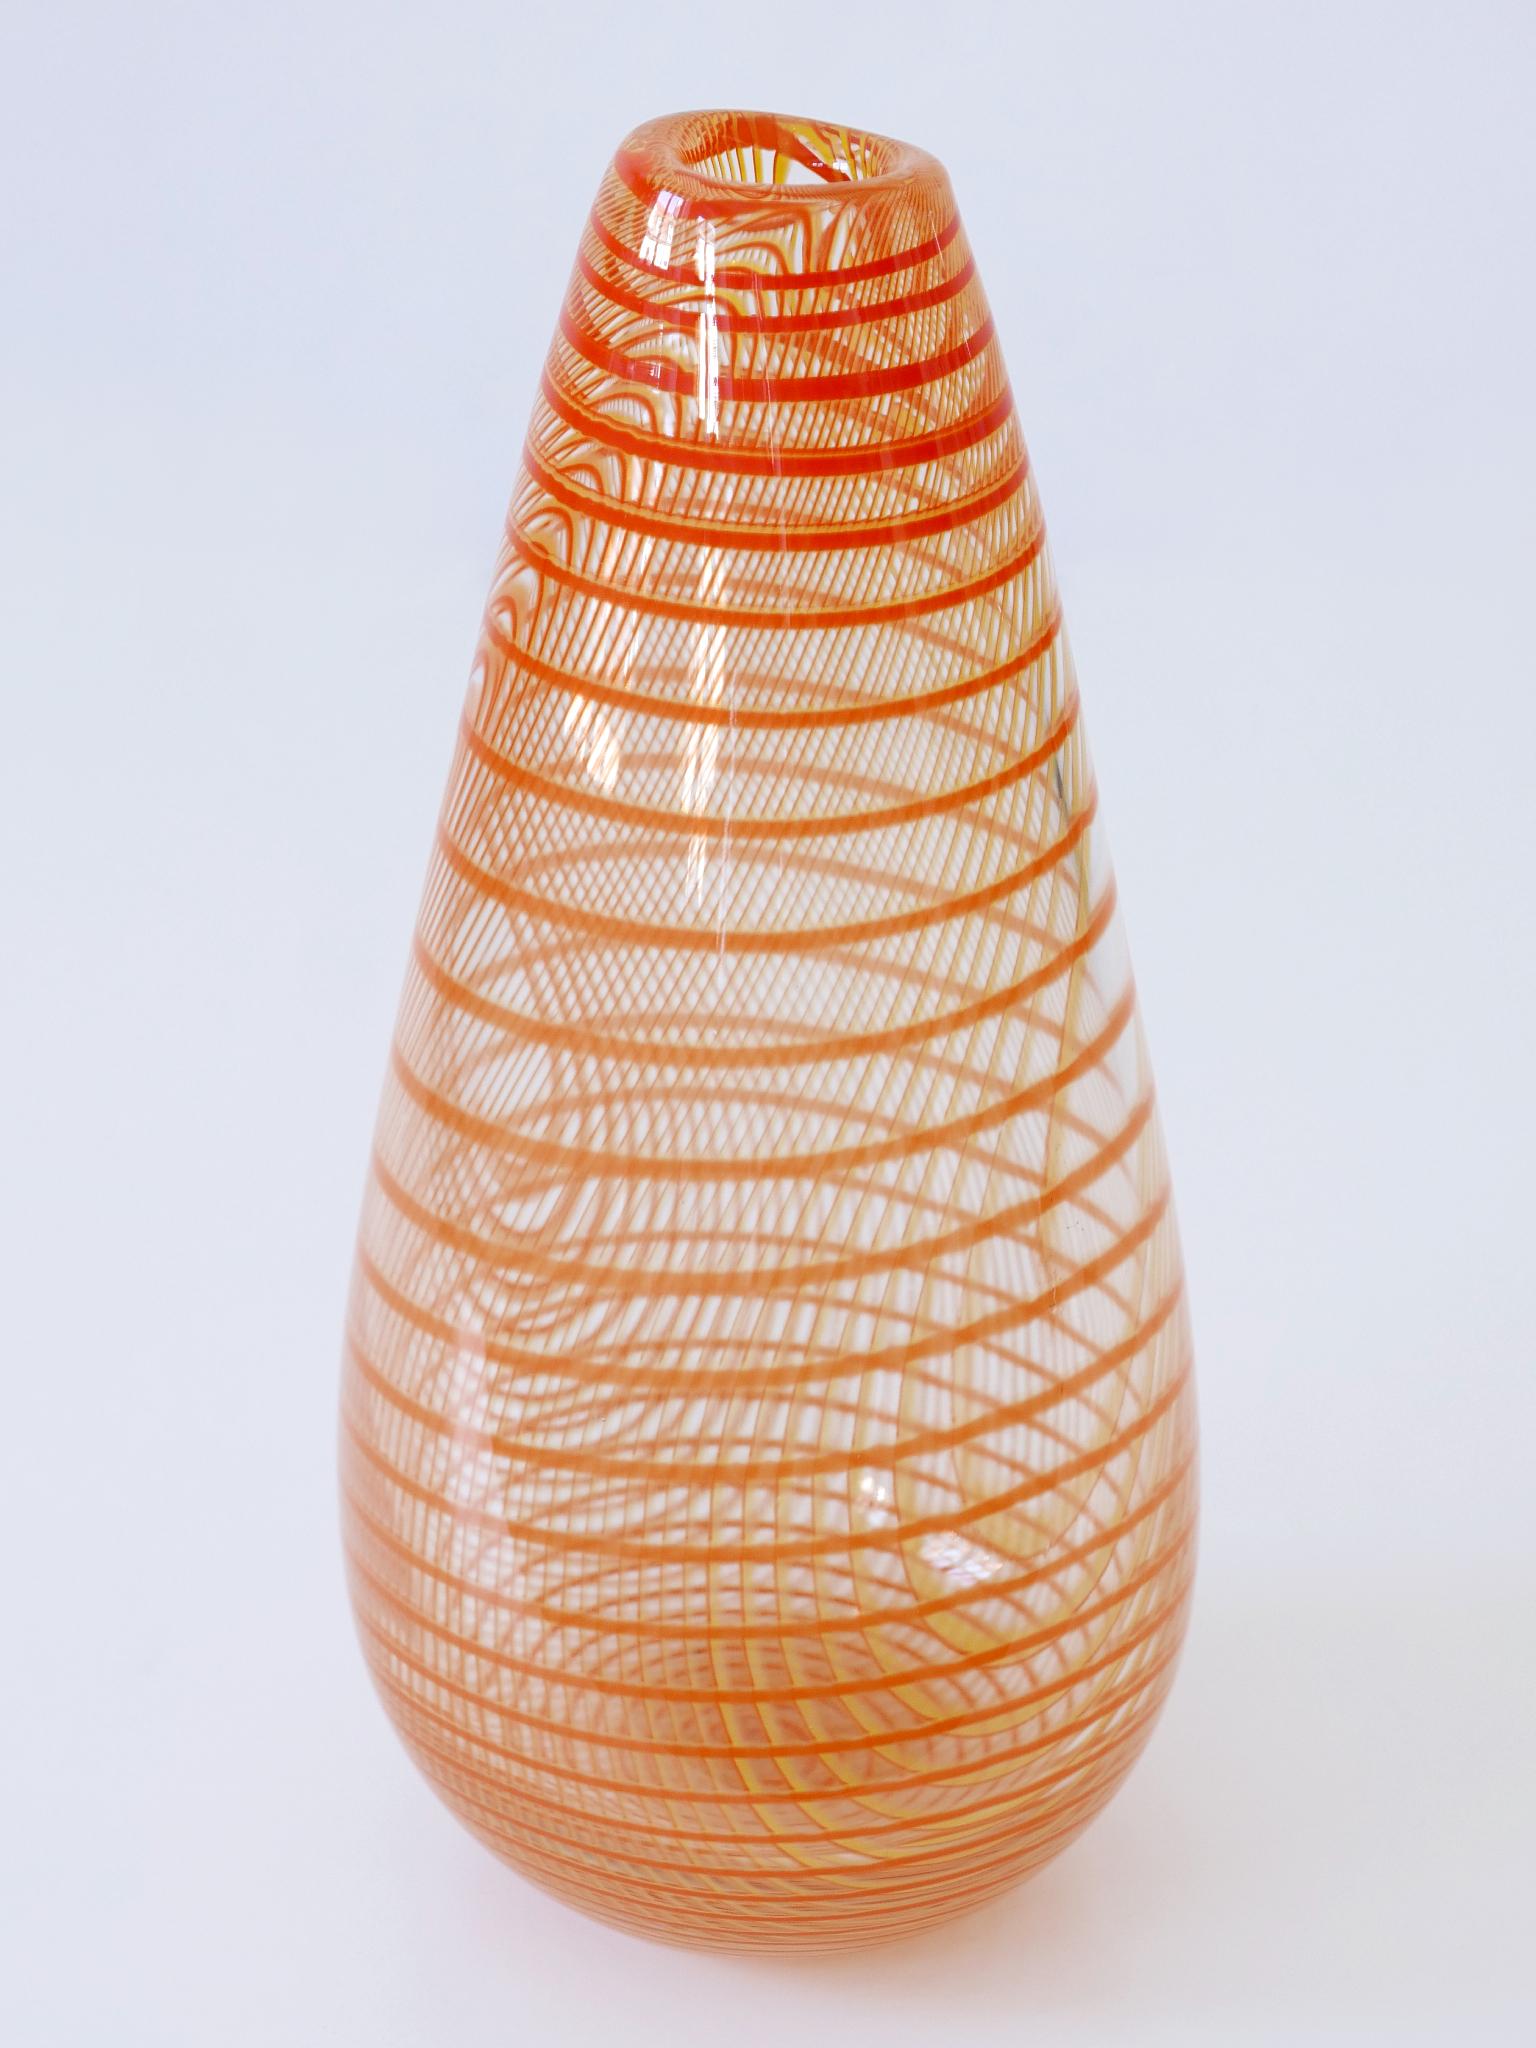 Signed & Limited Edition Art Glass Vase by Olle Brozén for Kosta Boda Sweden For Sale 7